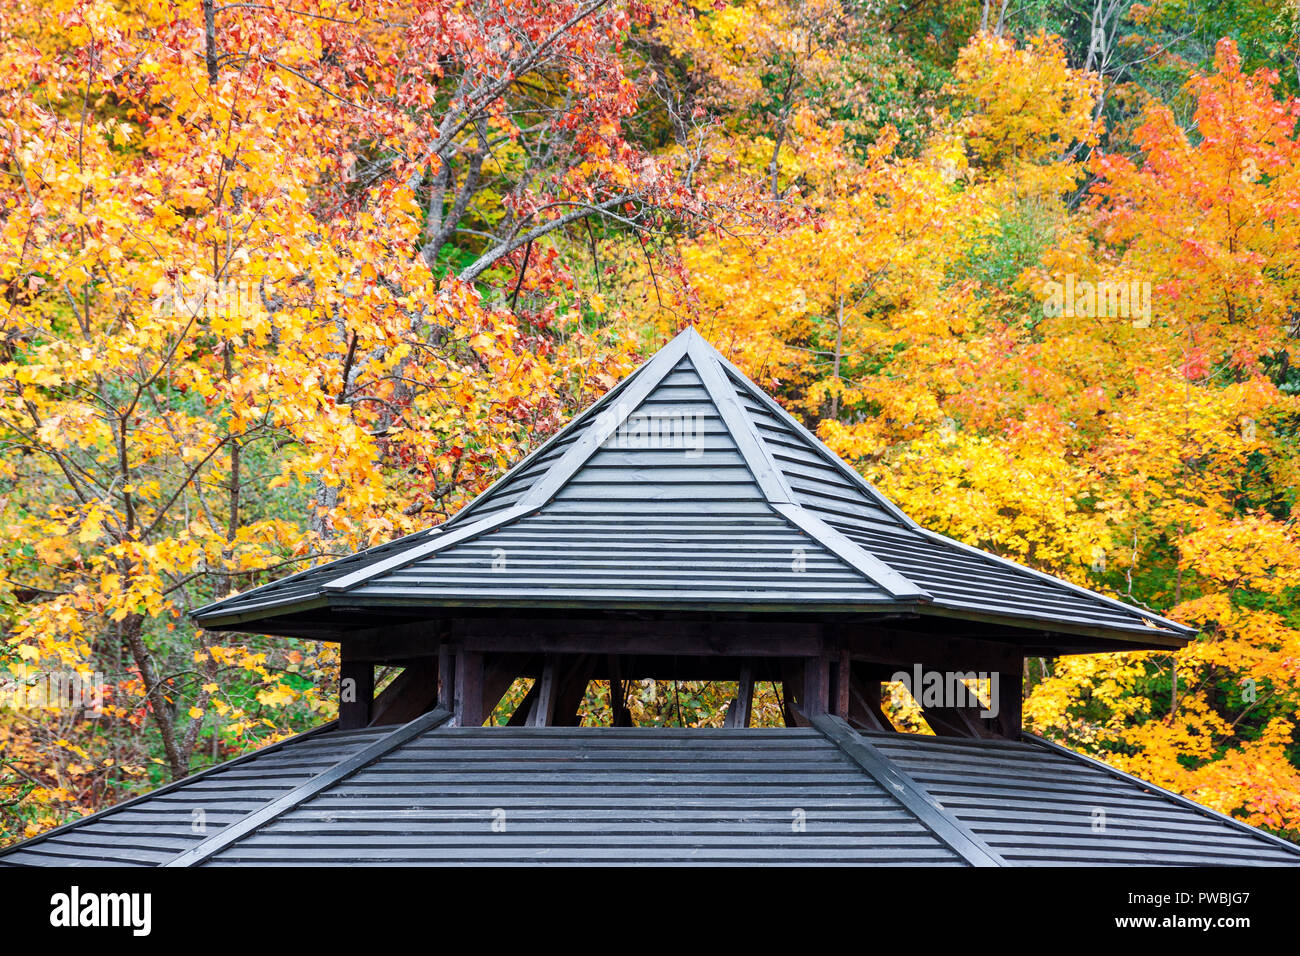 Ancient wooden roofing detail with yellow and red autumn foliage background Stock Photo